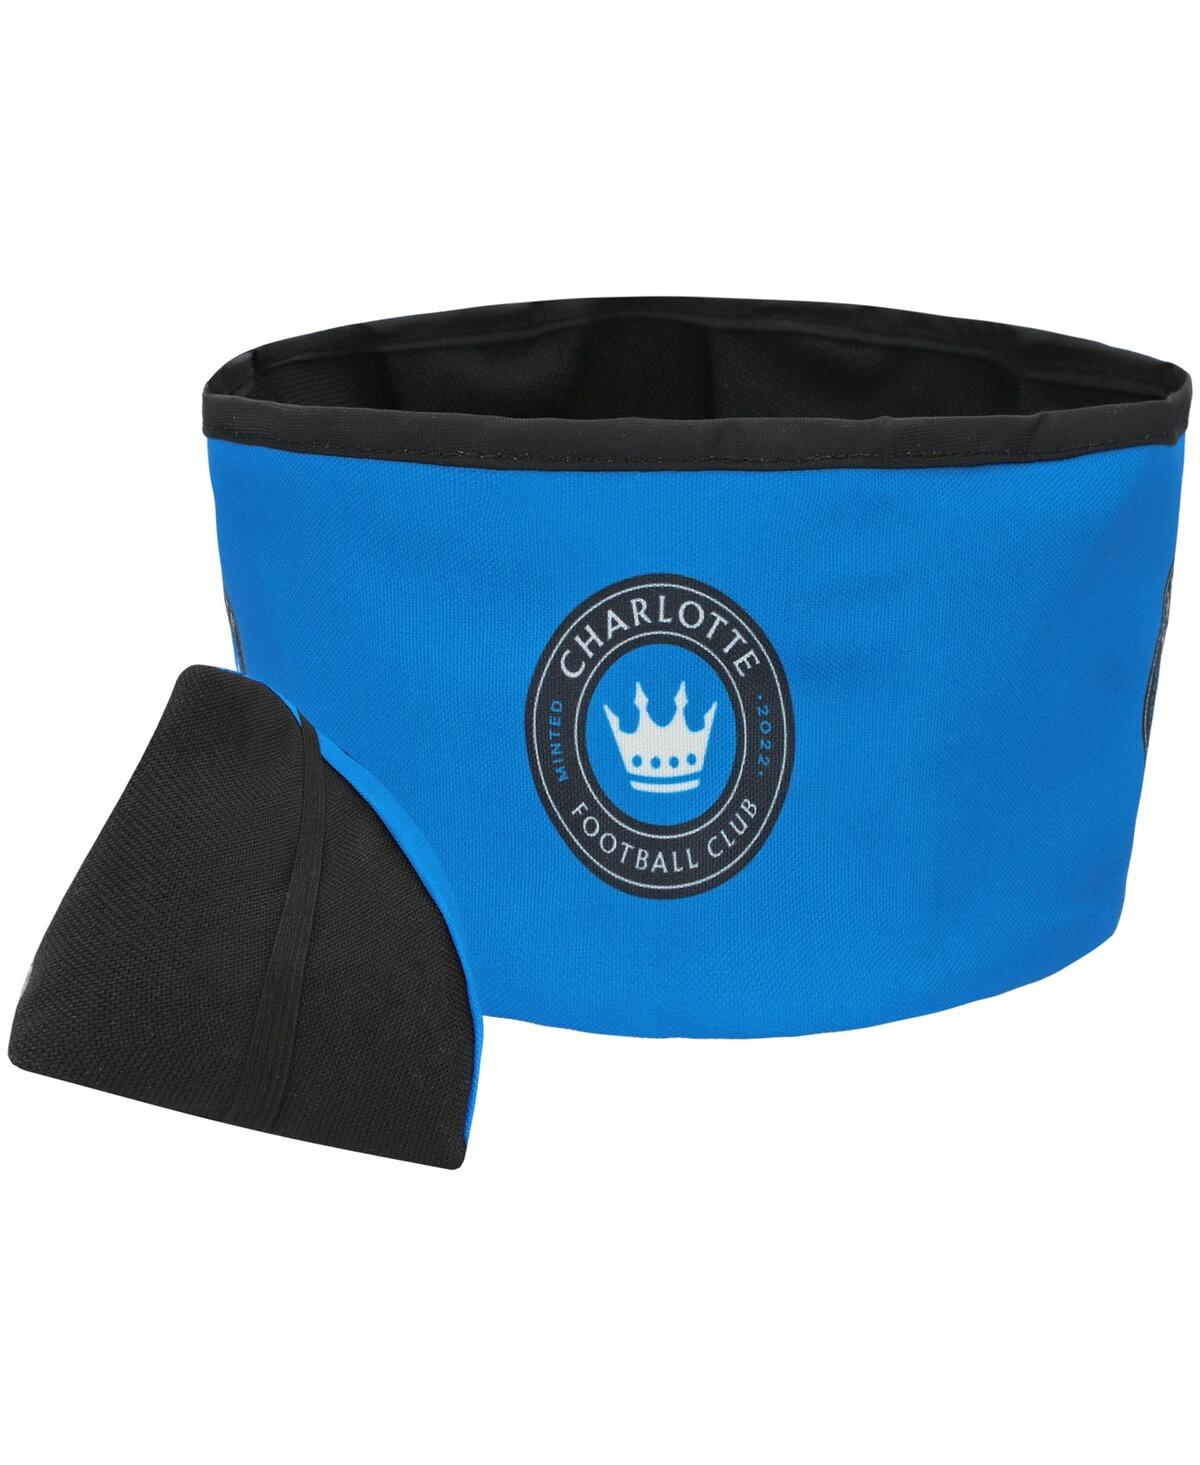 Charlotte Fc Travel Collapsible Bowl - Blue